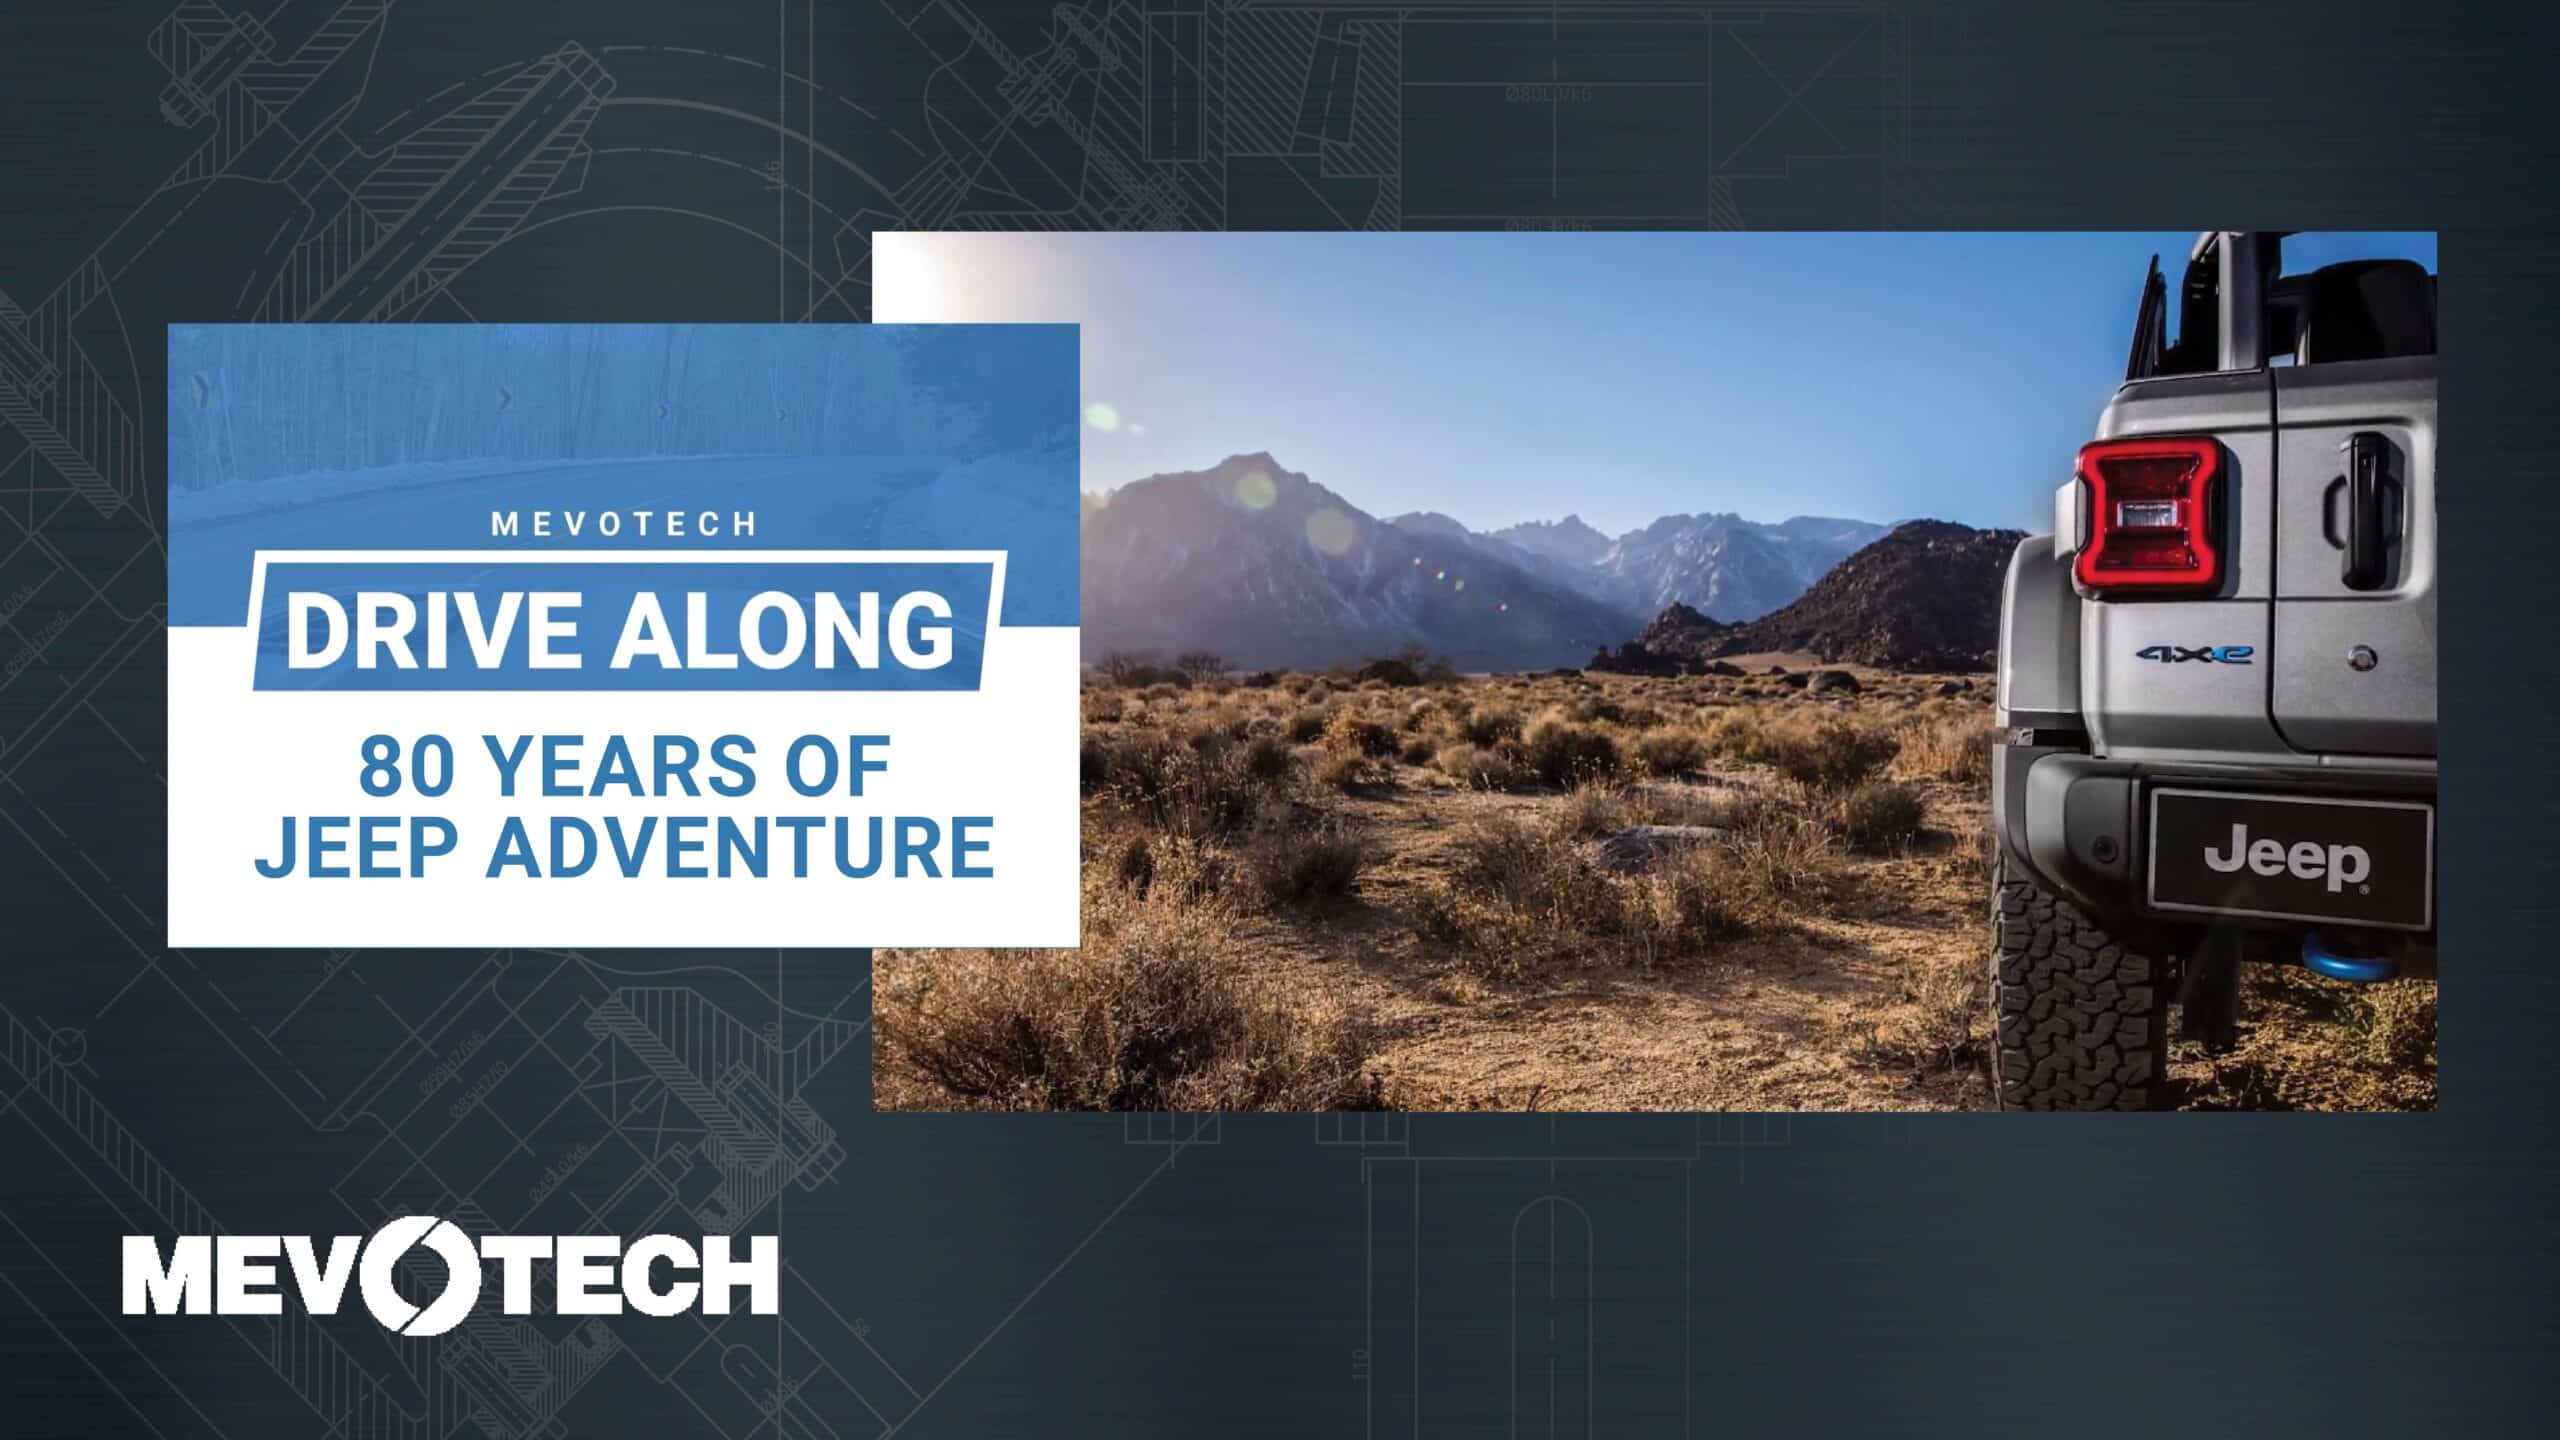 Mevotech Ride Along- Jeep: 80 Years of Freedom, Adventure & Authenticity